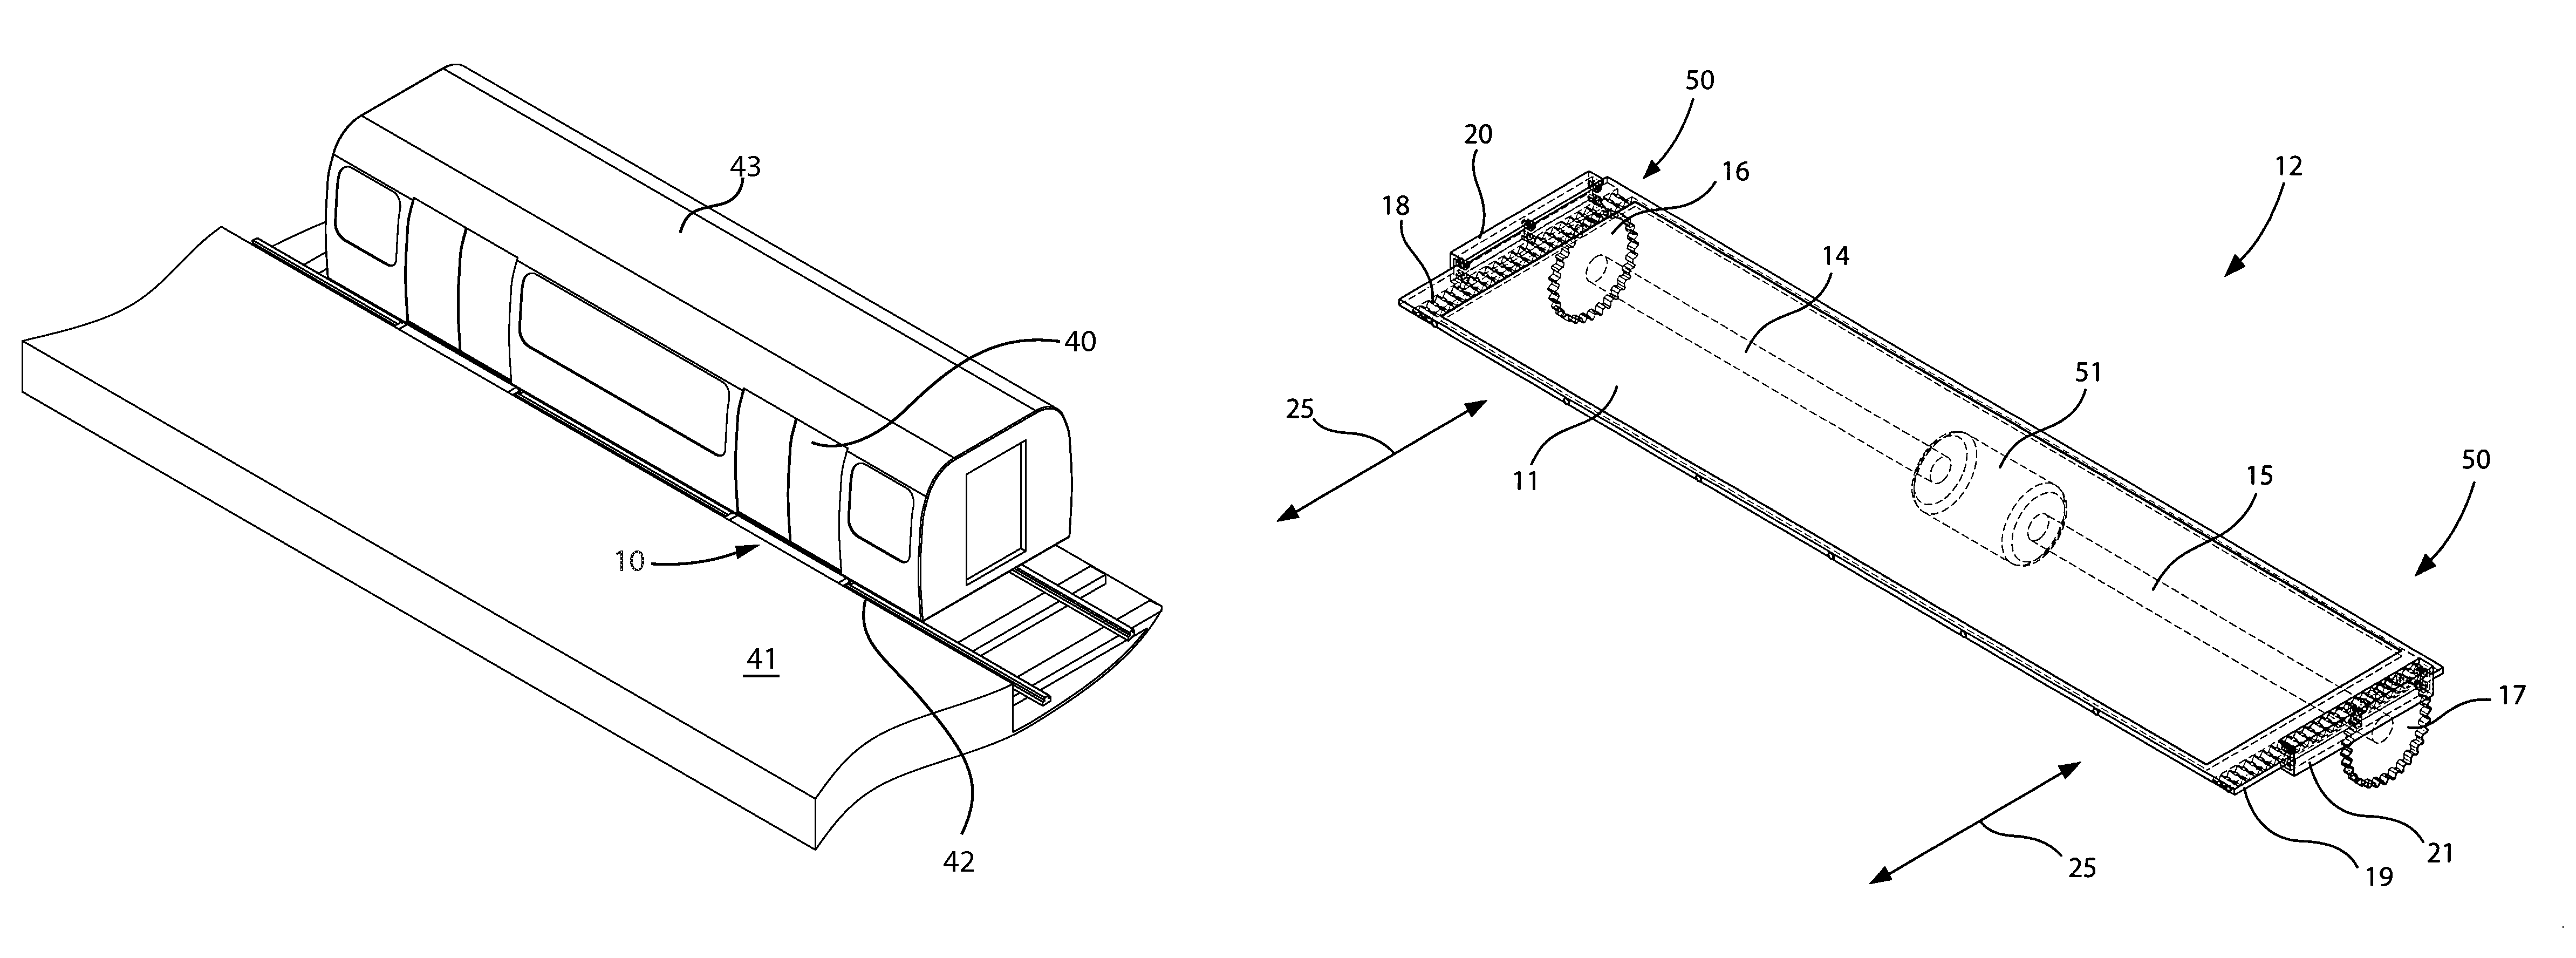 Retractable platform device for use with subway trains and associated method